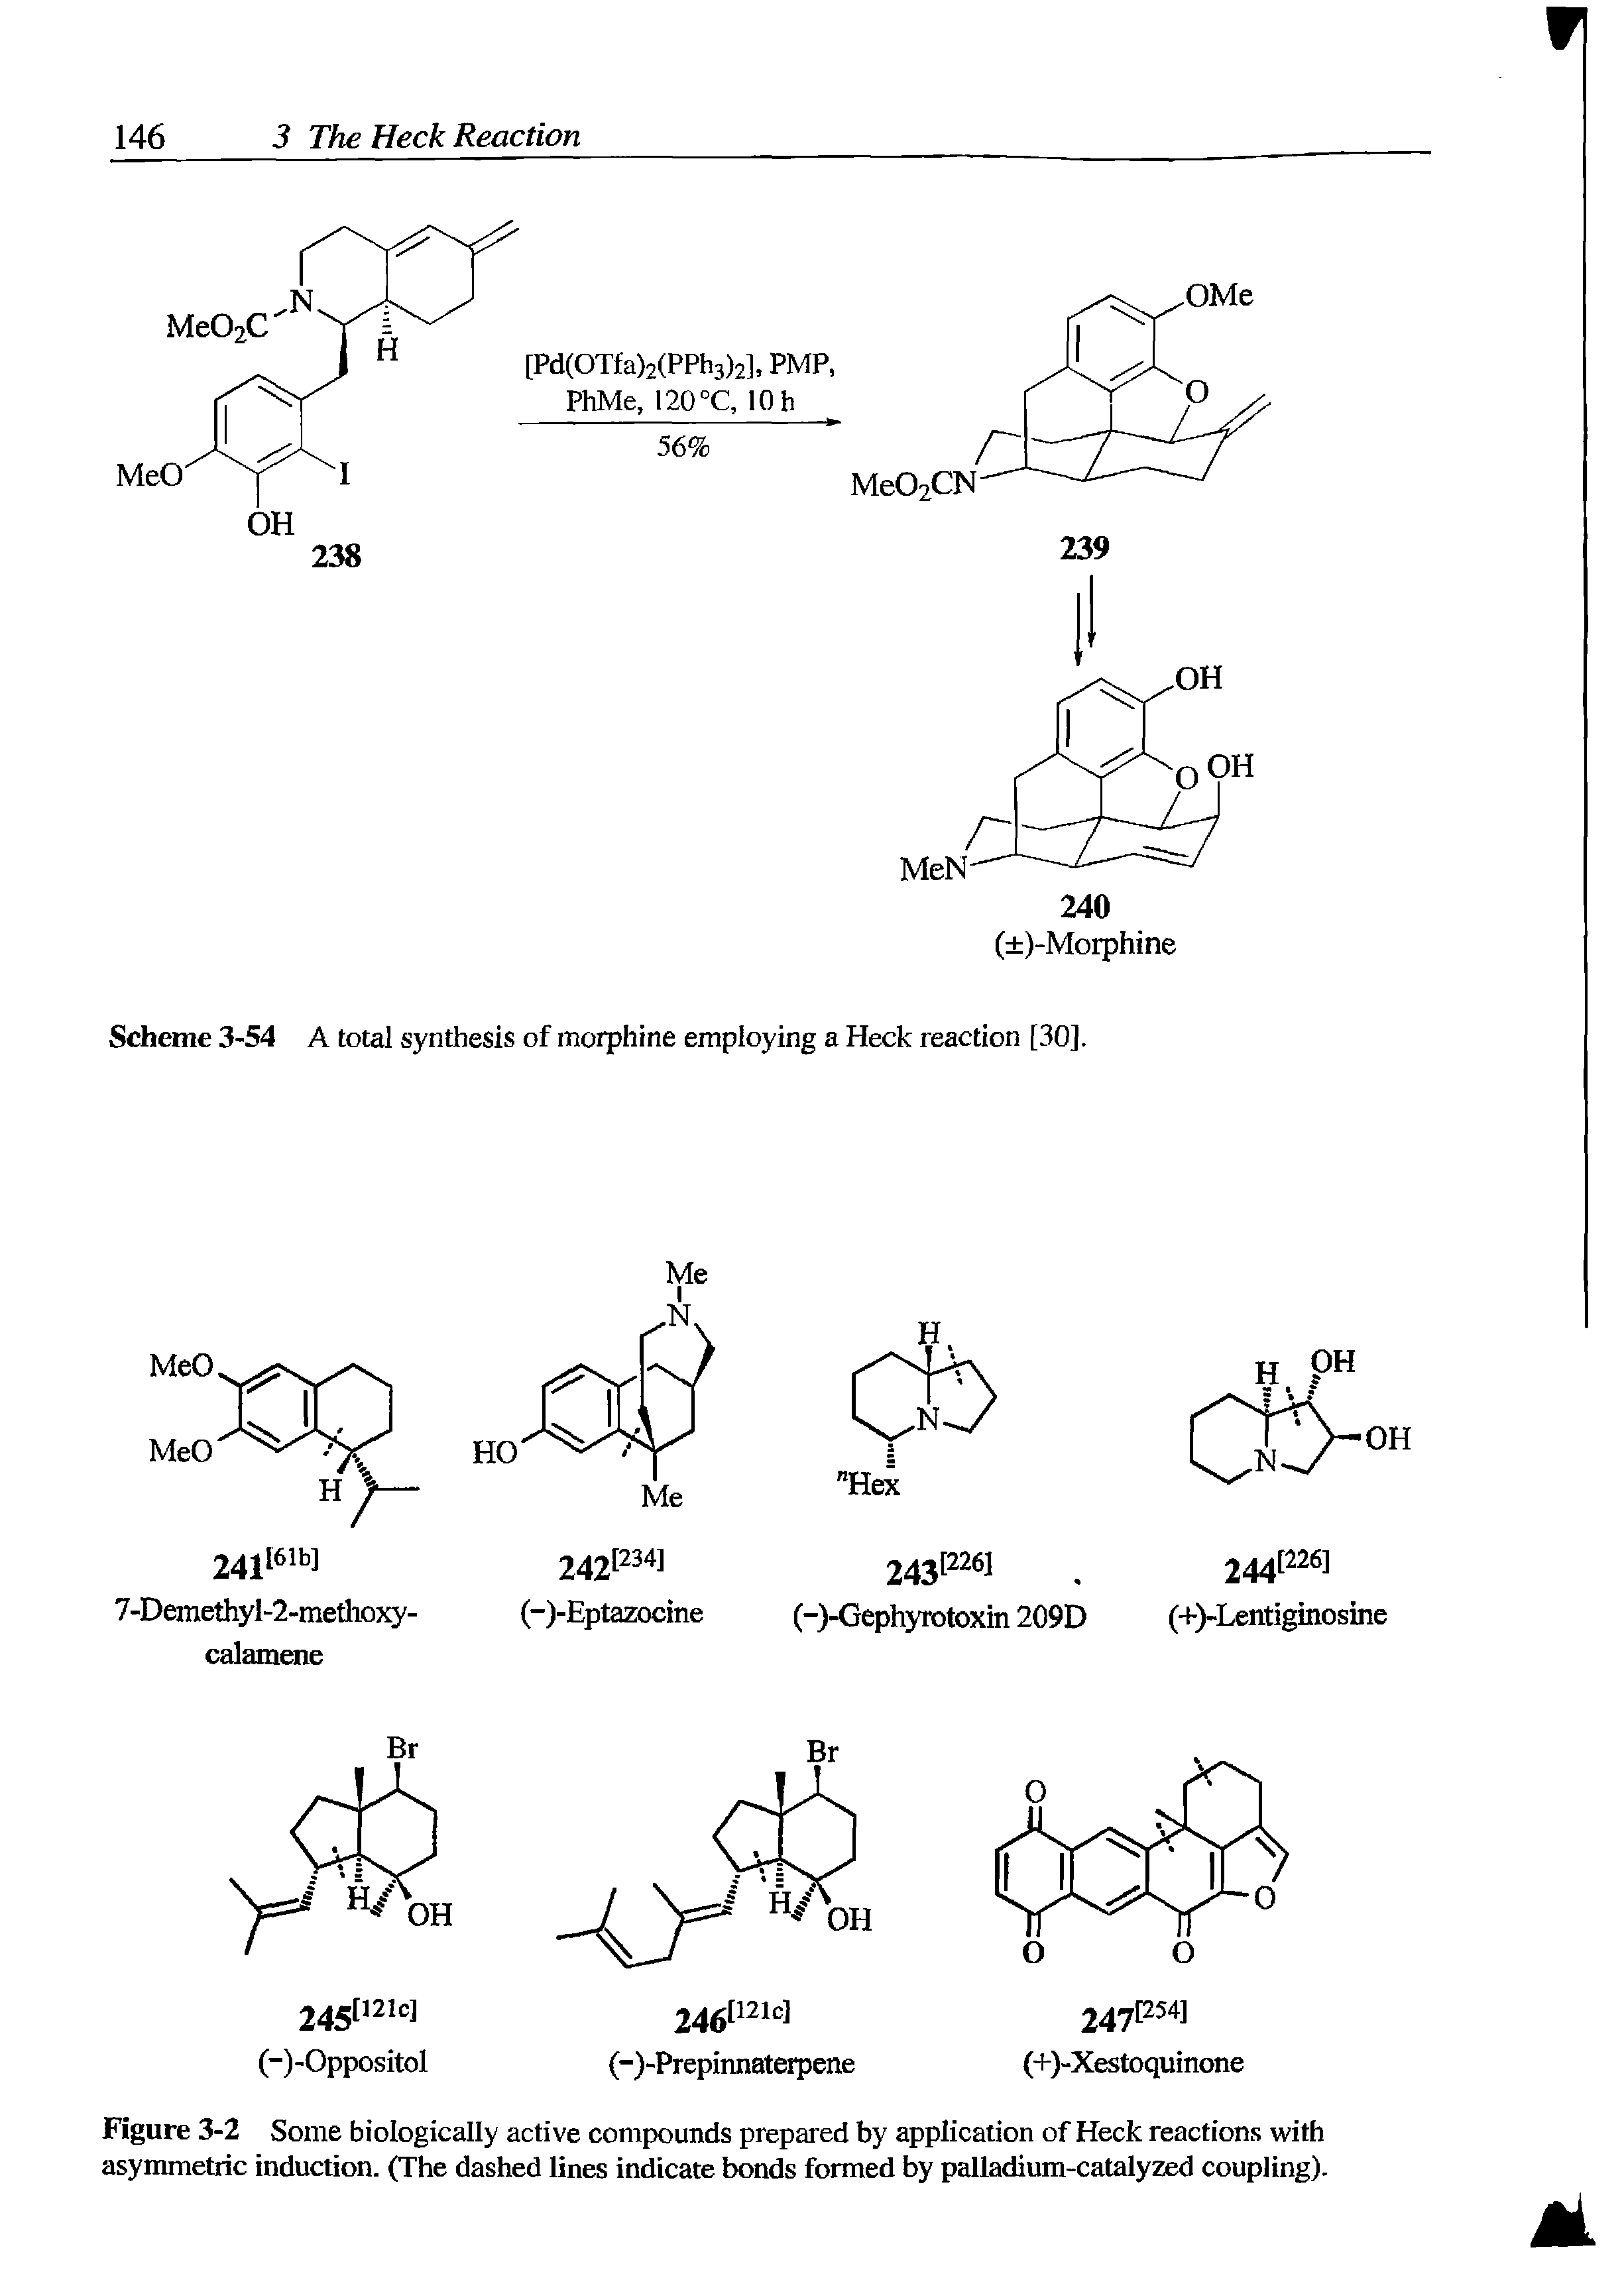 Figure 3-2 Some biologically active compounds prepared by application of Heck reactions with asymmetric induction. (The dashed lines indicate bonds formed by palladium-catalyzed coupling).